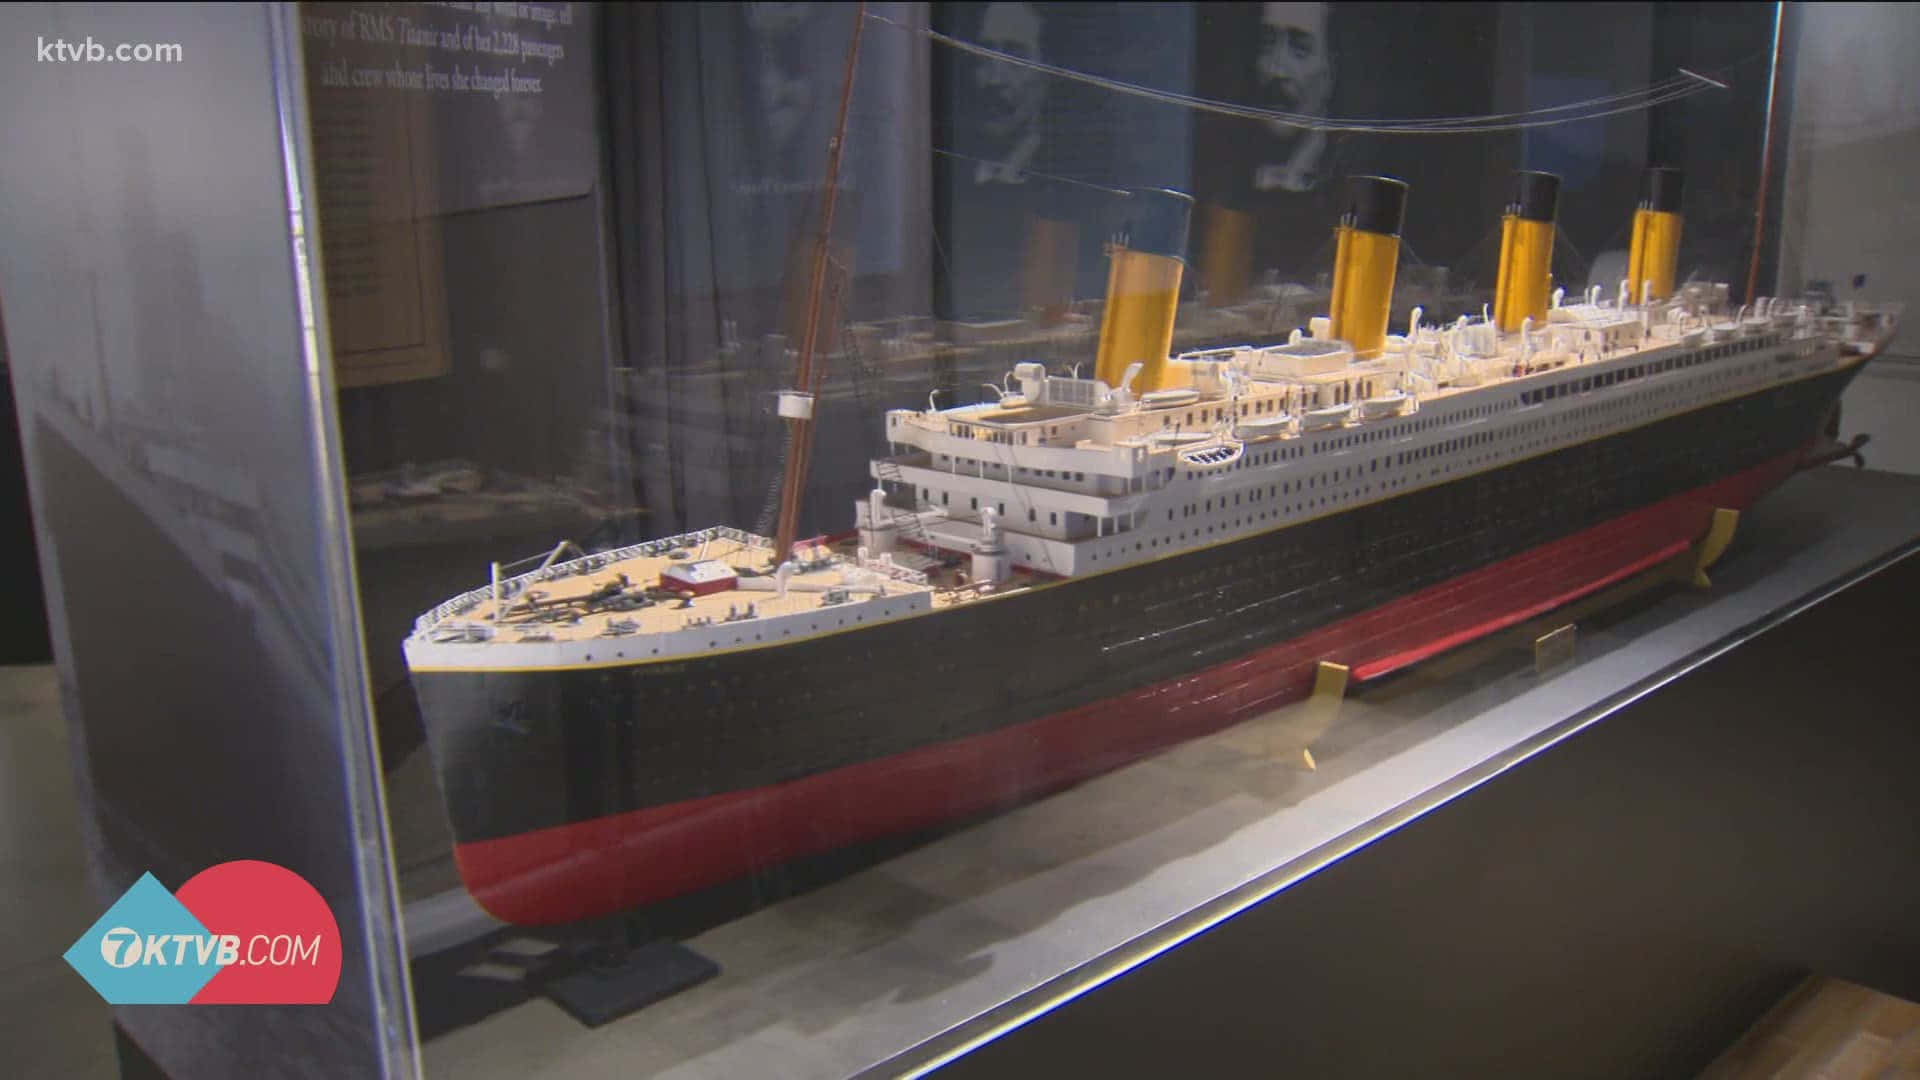 Rms Titanic Museum Ship Model Inside Glass Picture